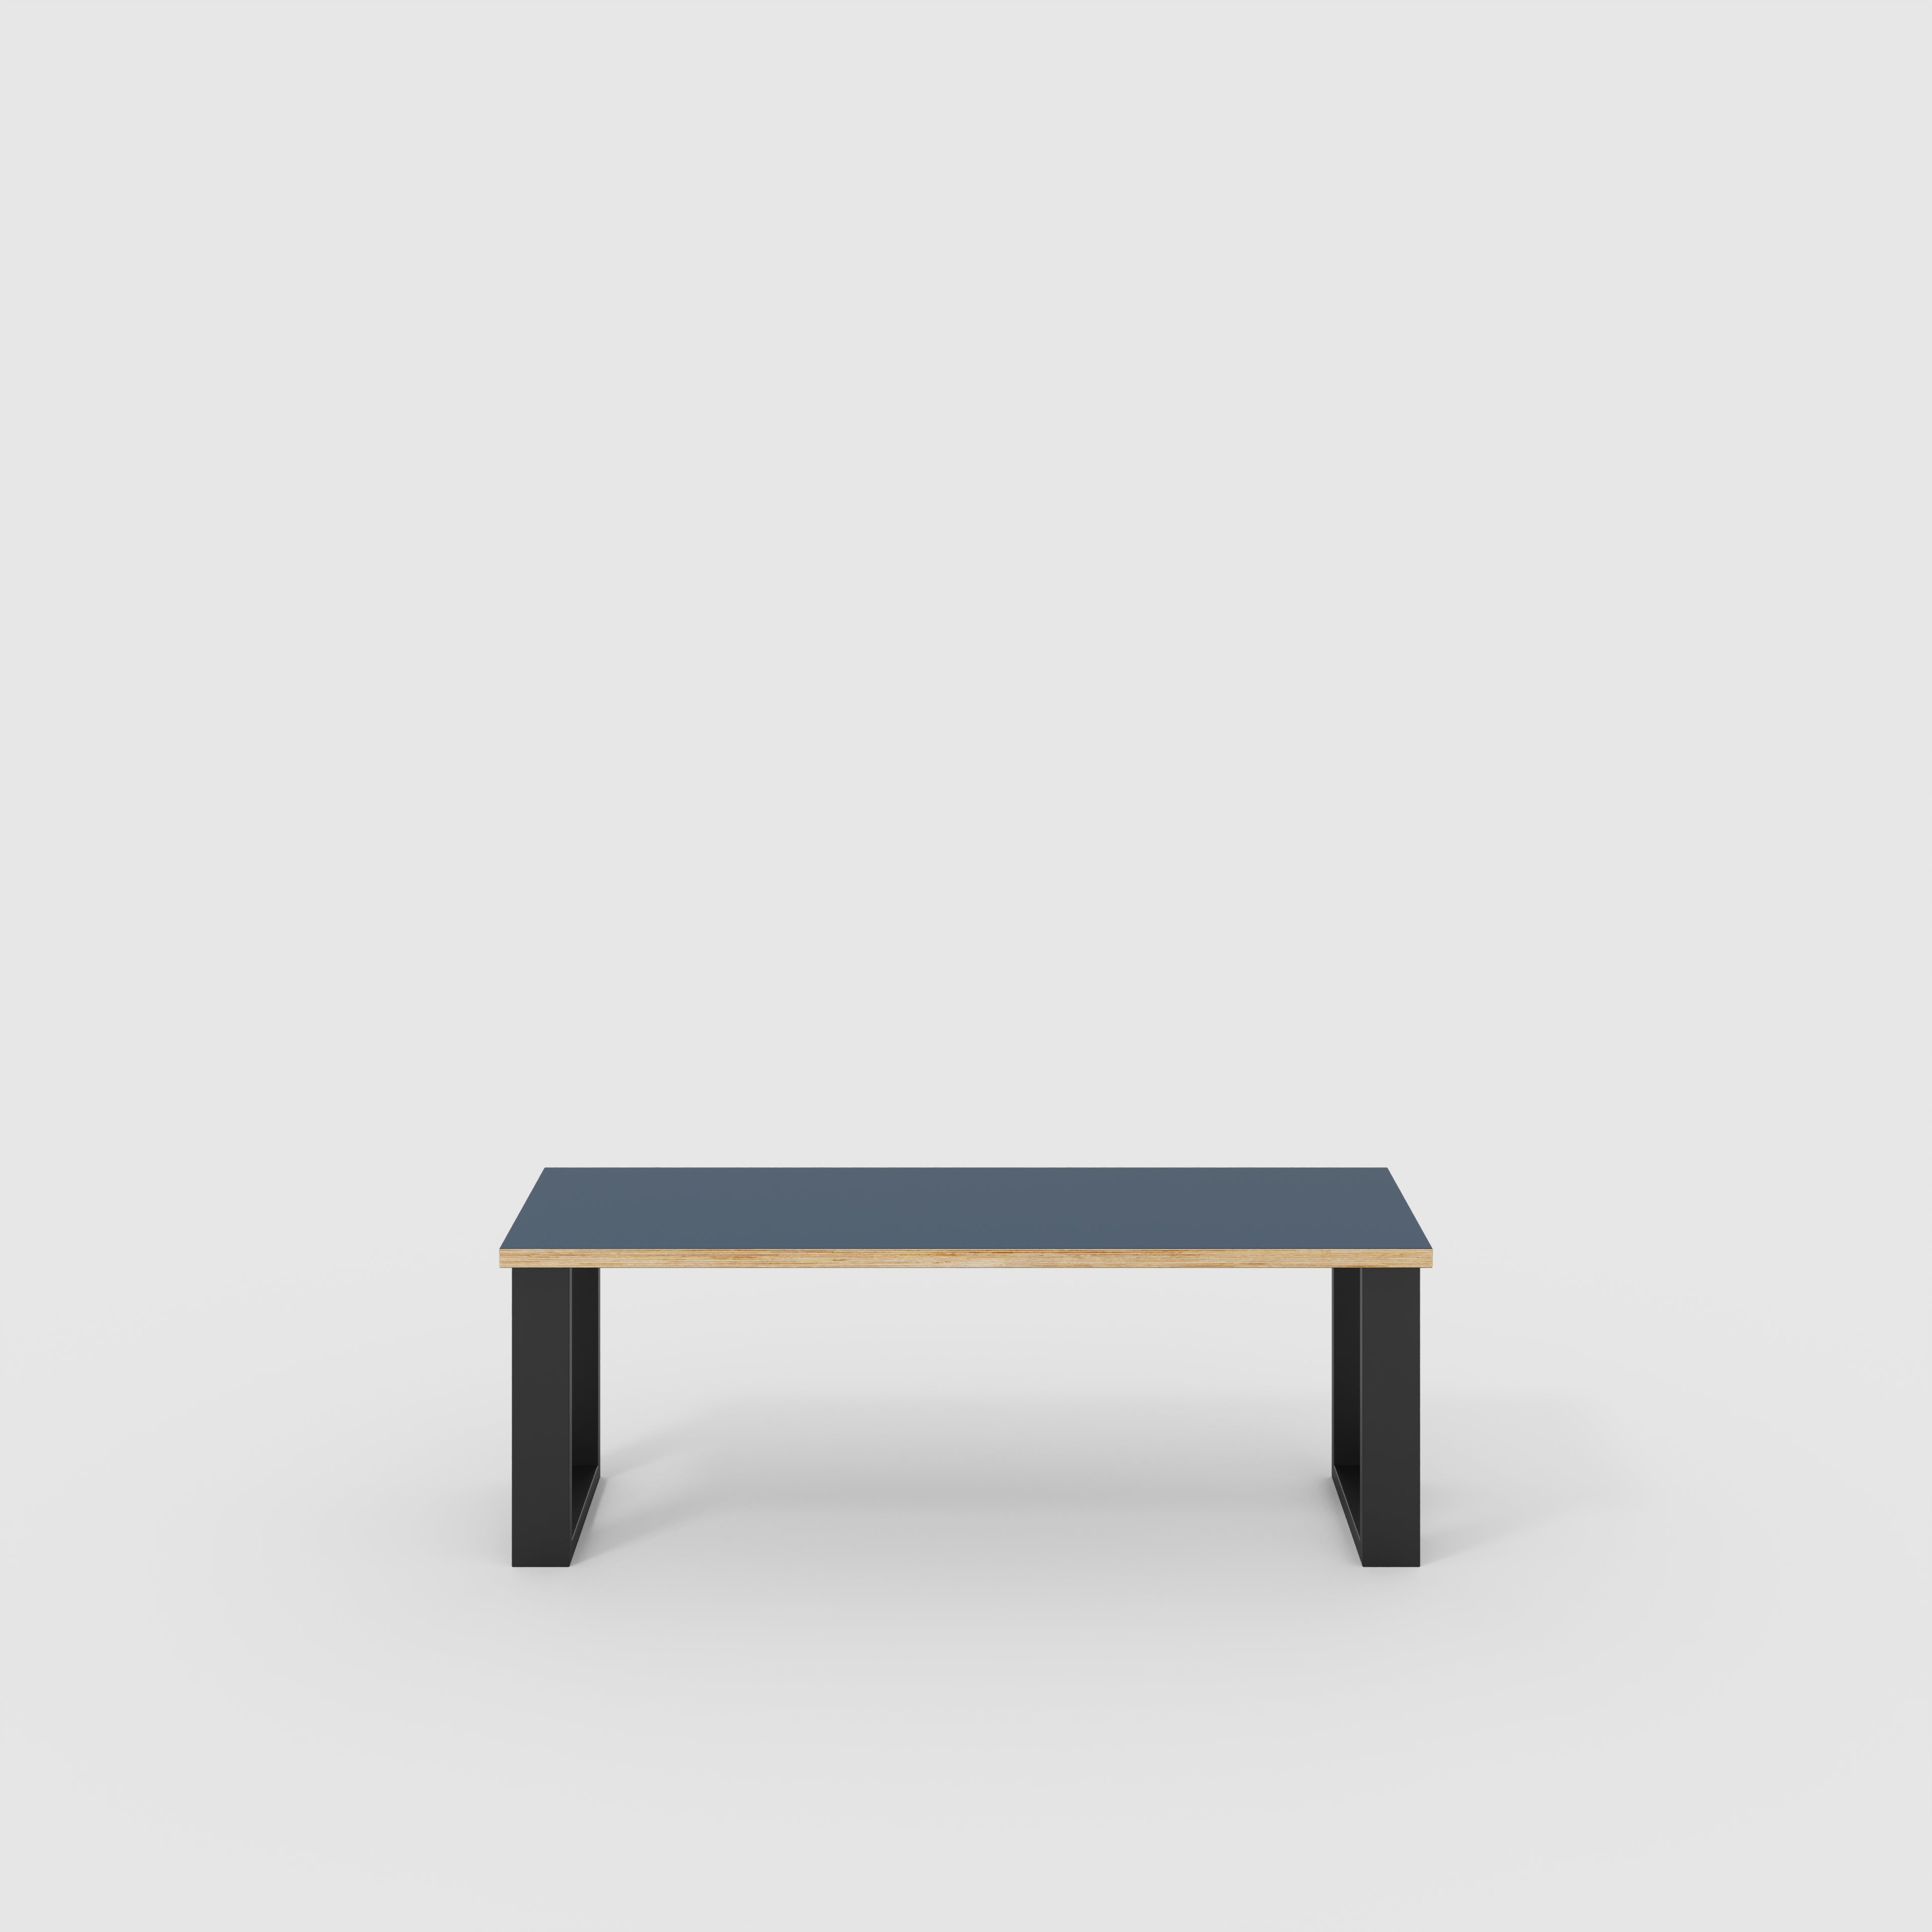 Bench Seat with Black Industrial Legs - Formica Night Sea Blue - 1200(w) x 400(d)